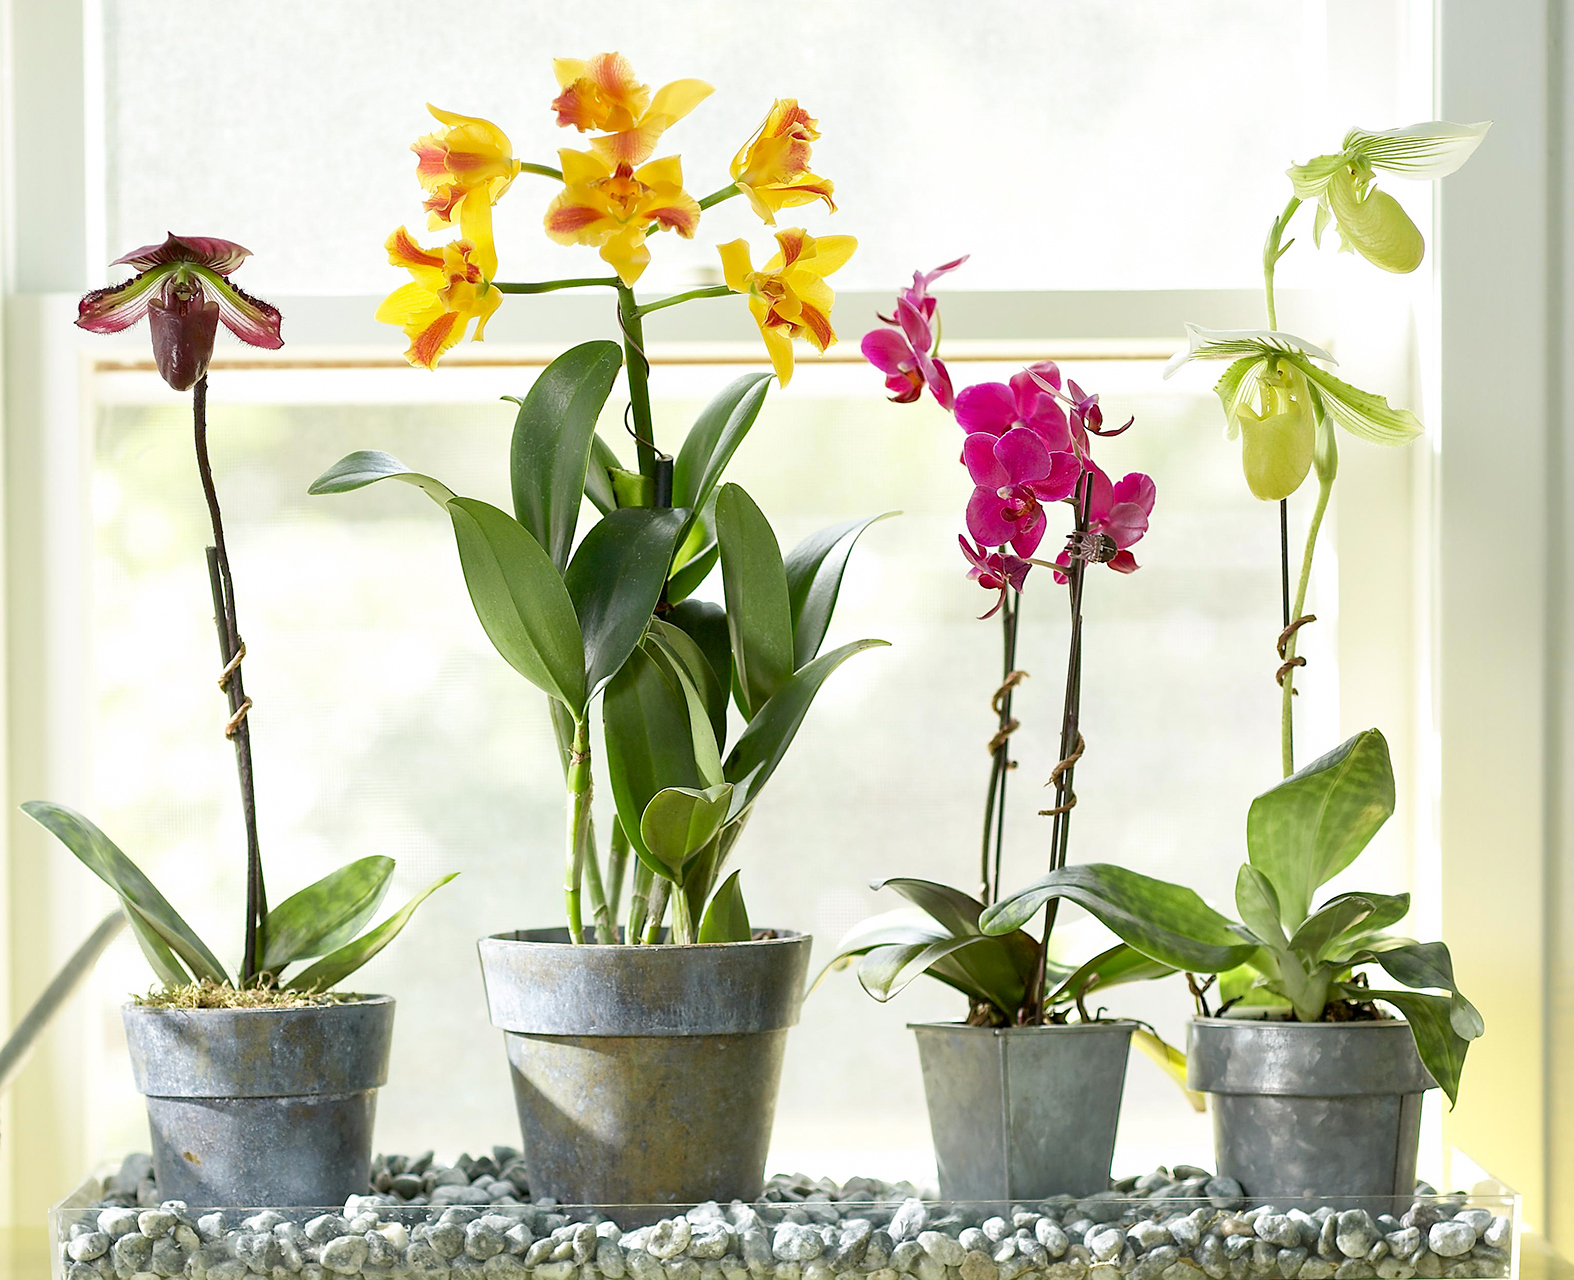 6 Simple Tricks to Make Your Orchids Look Splendid!